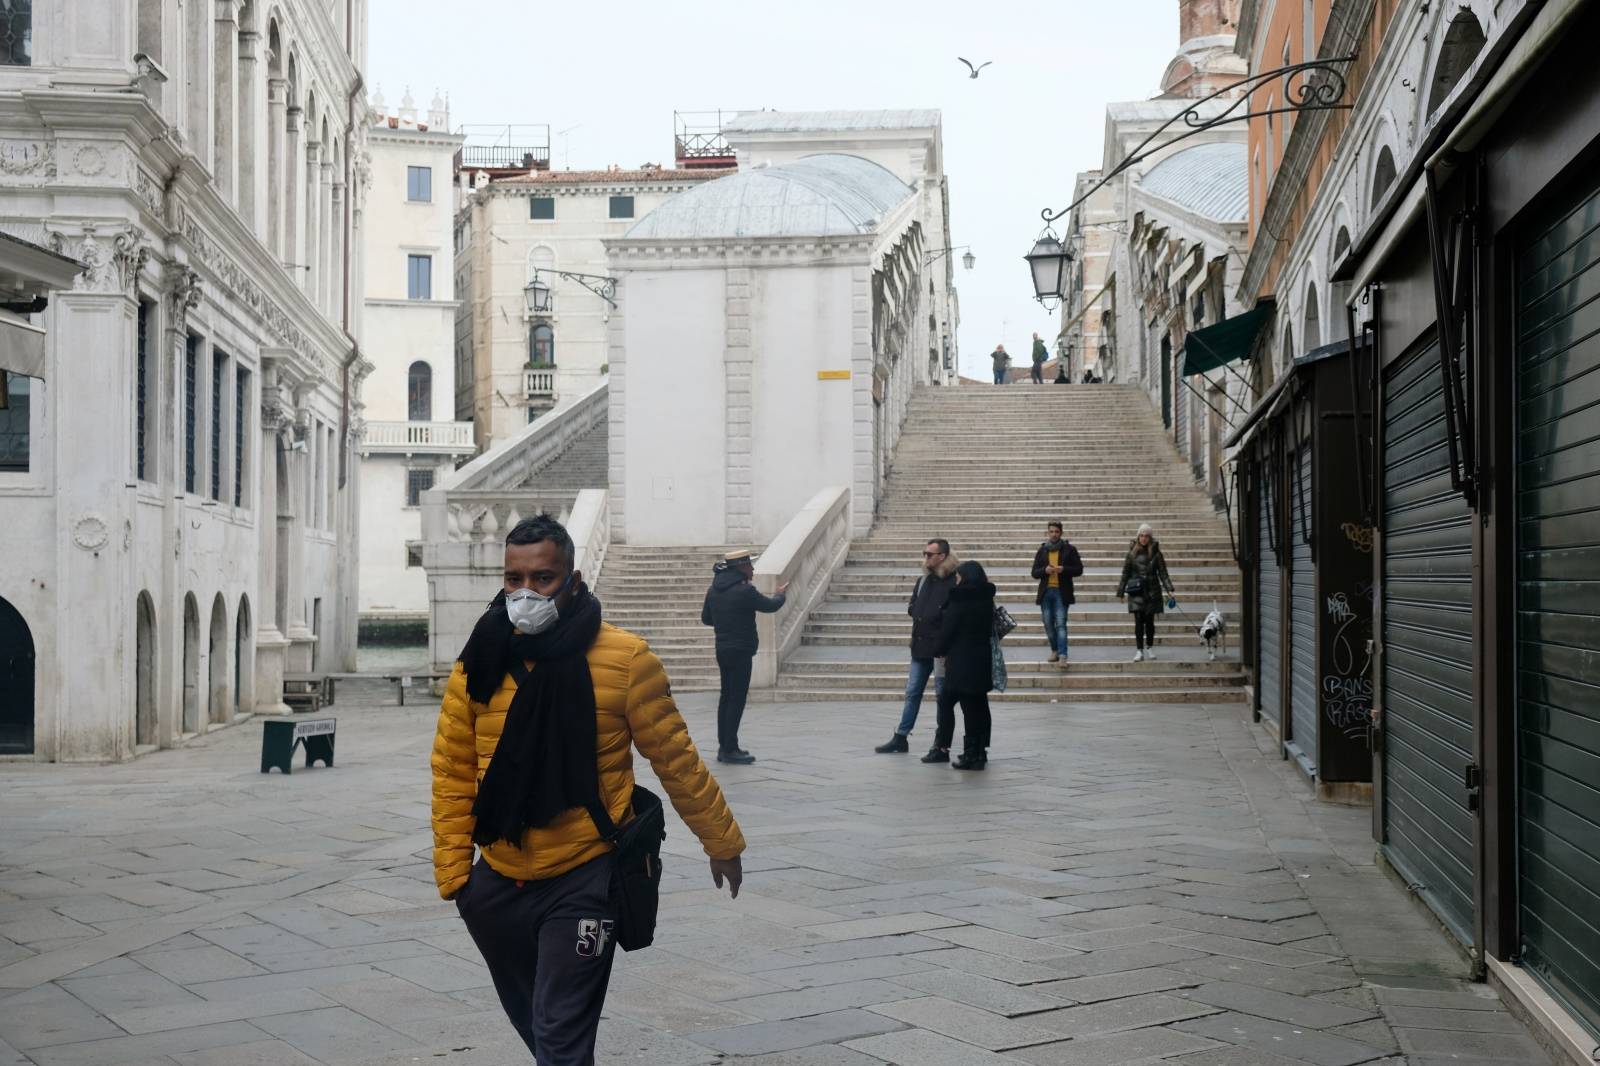 A man wearing a protective face mask walks through a street after the Italian government imposed a virtual lockdown on the north of Italy including Venice to try to contain a coronavirus outbreak, in Venice